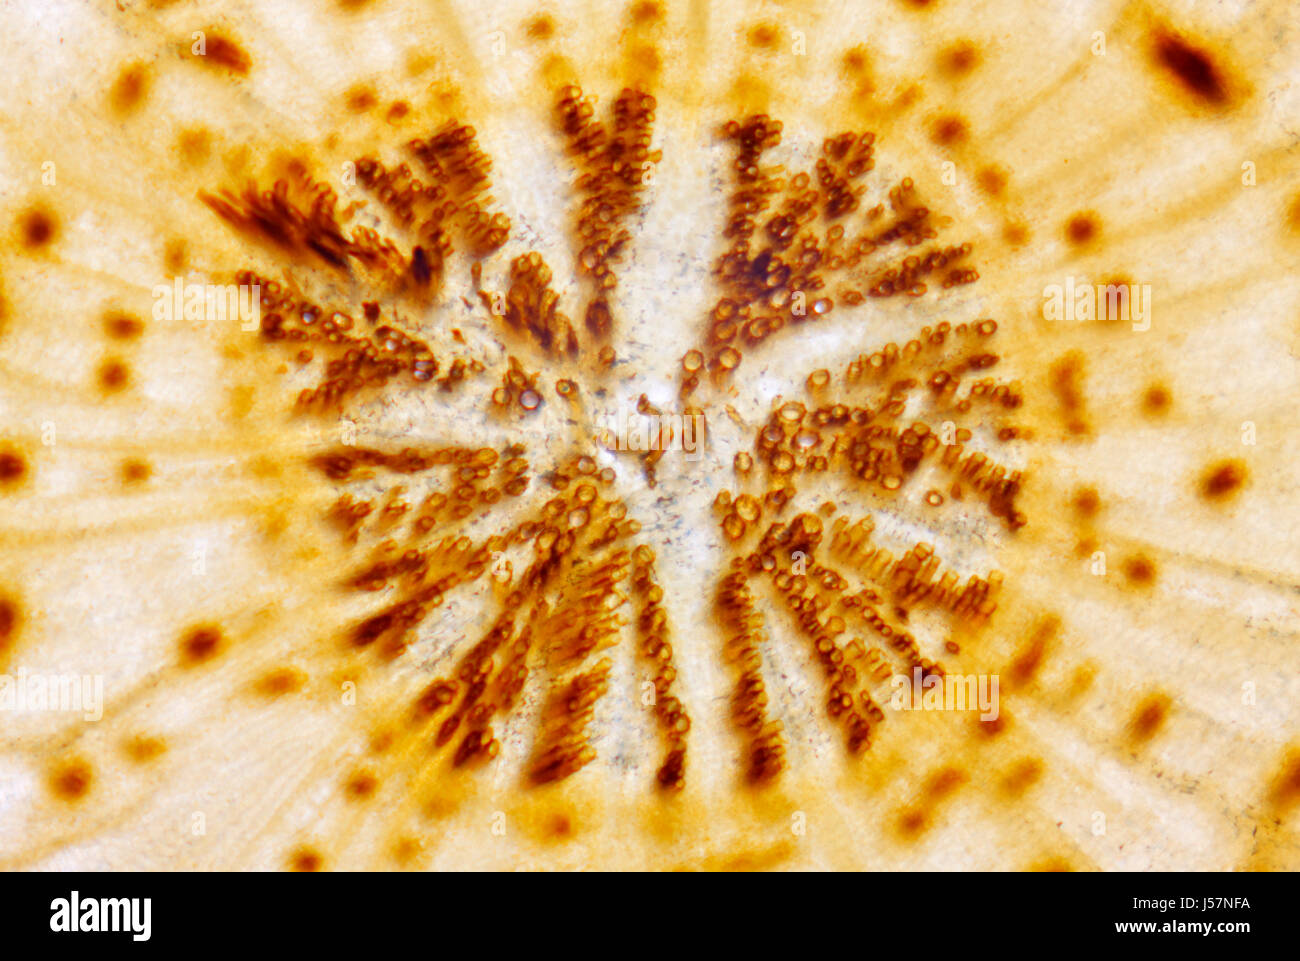 Cross section root centre of the Carrot (Daucus carota subsp. sativus). Brightfield illumination, brown stain (manganese dioxide). Stock Photo